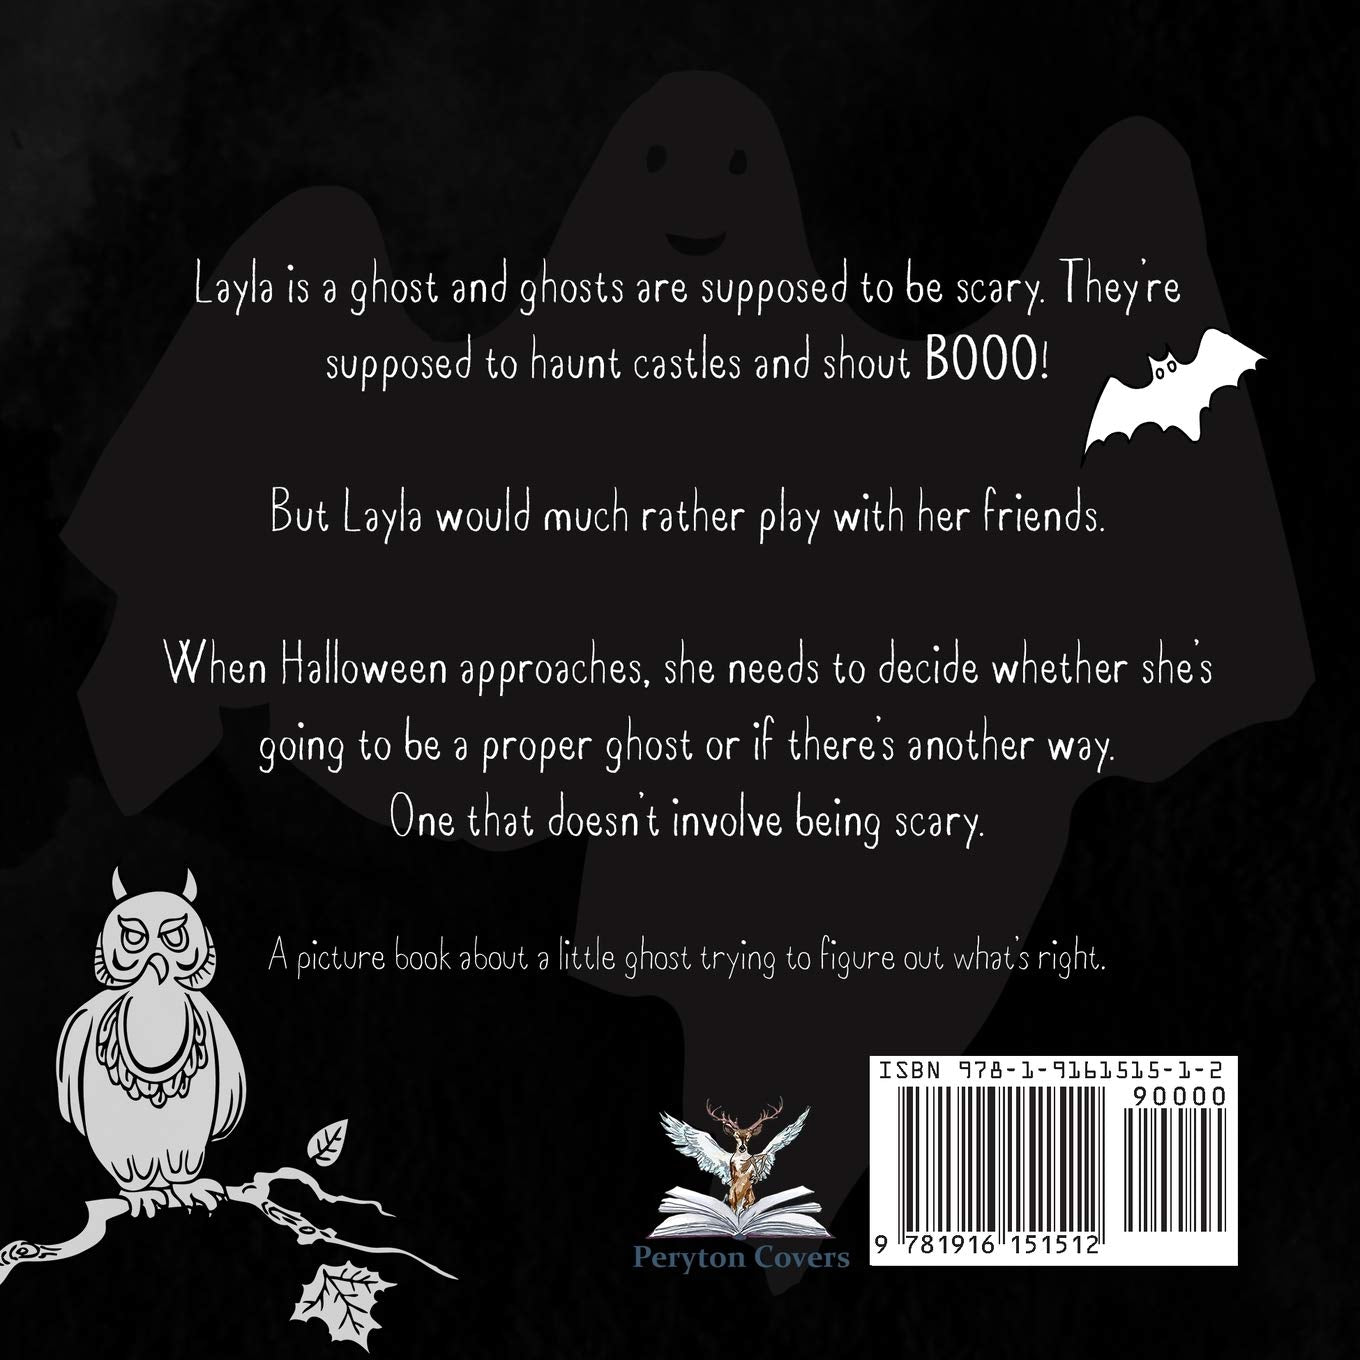 The Little Ghost Who Didn't Like to Be Scary: A Halloween Picture Book